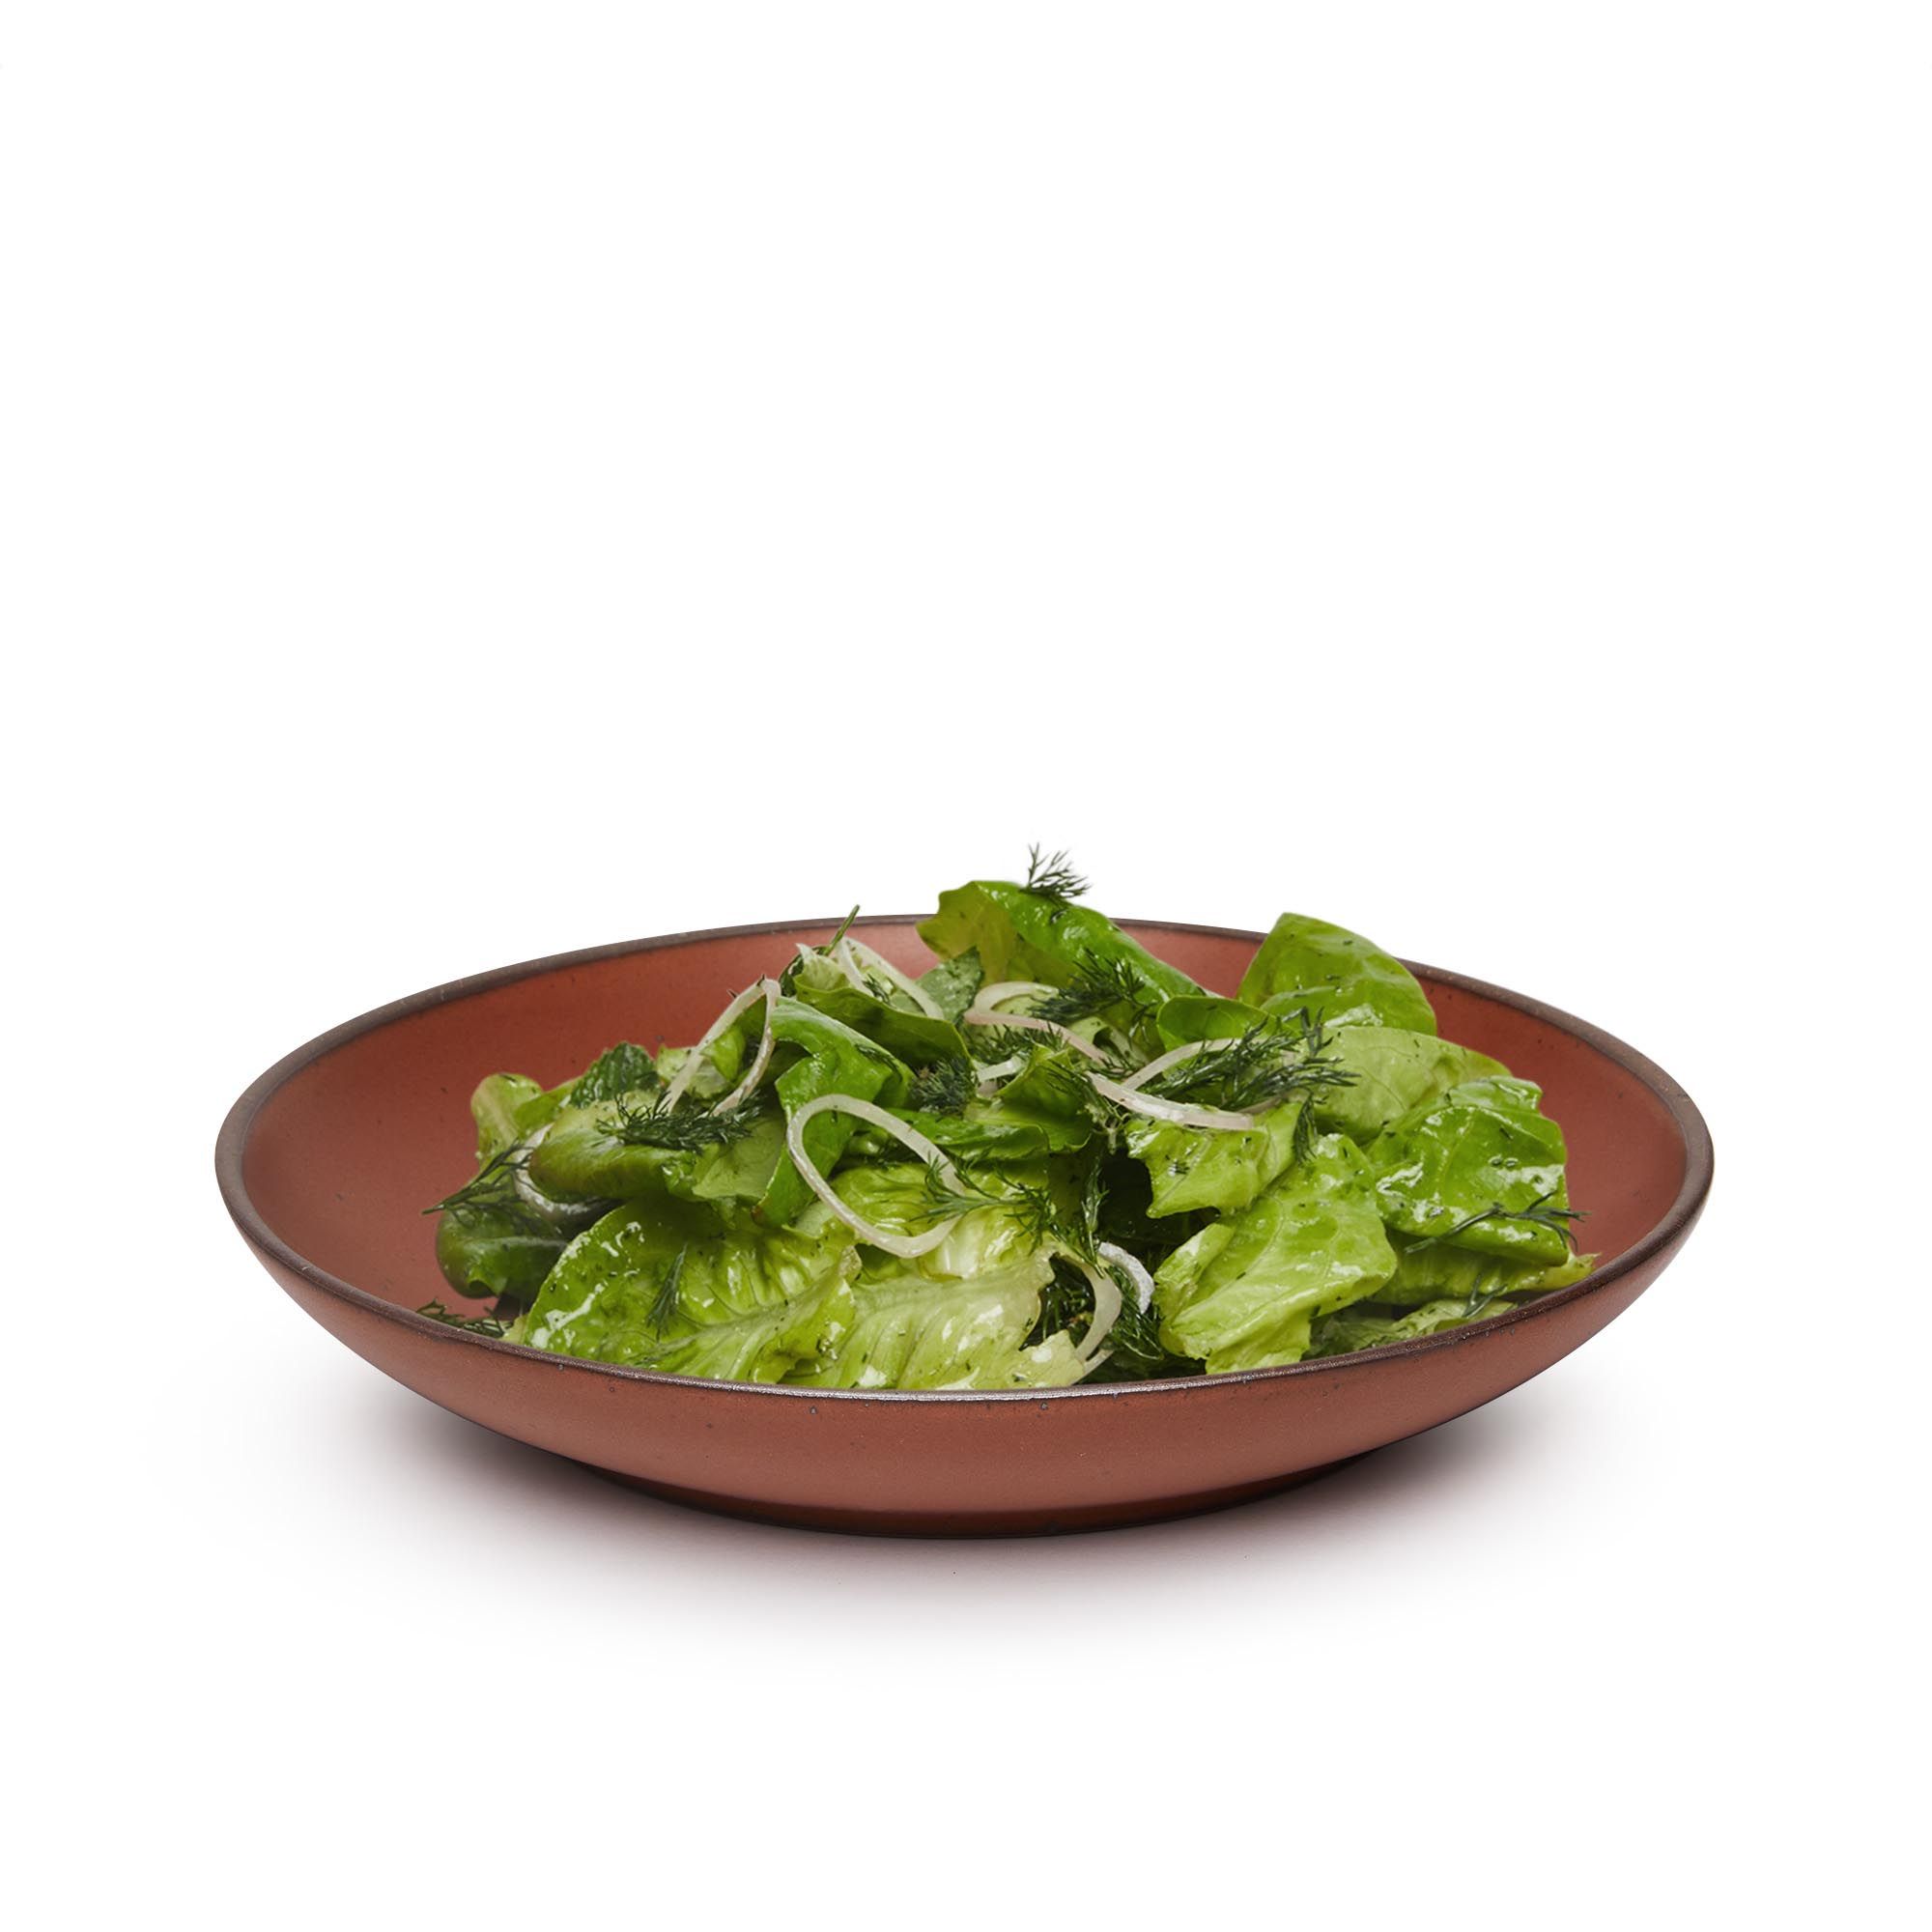 A salad on a large ceramic plate with a curved bowl edge in a cool burnt terracotta color featuring iron speckles and an unglazed rim.